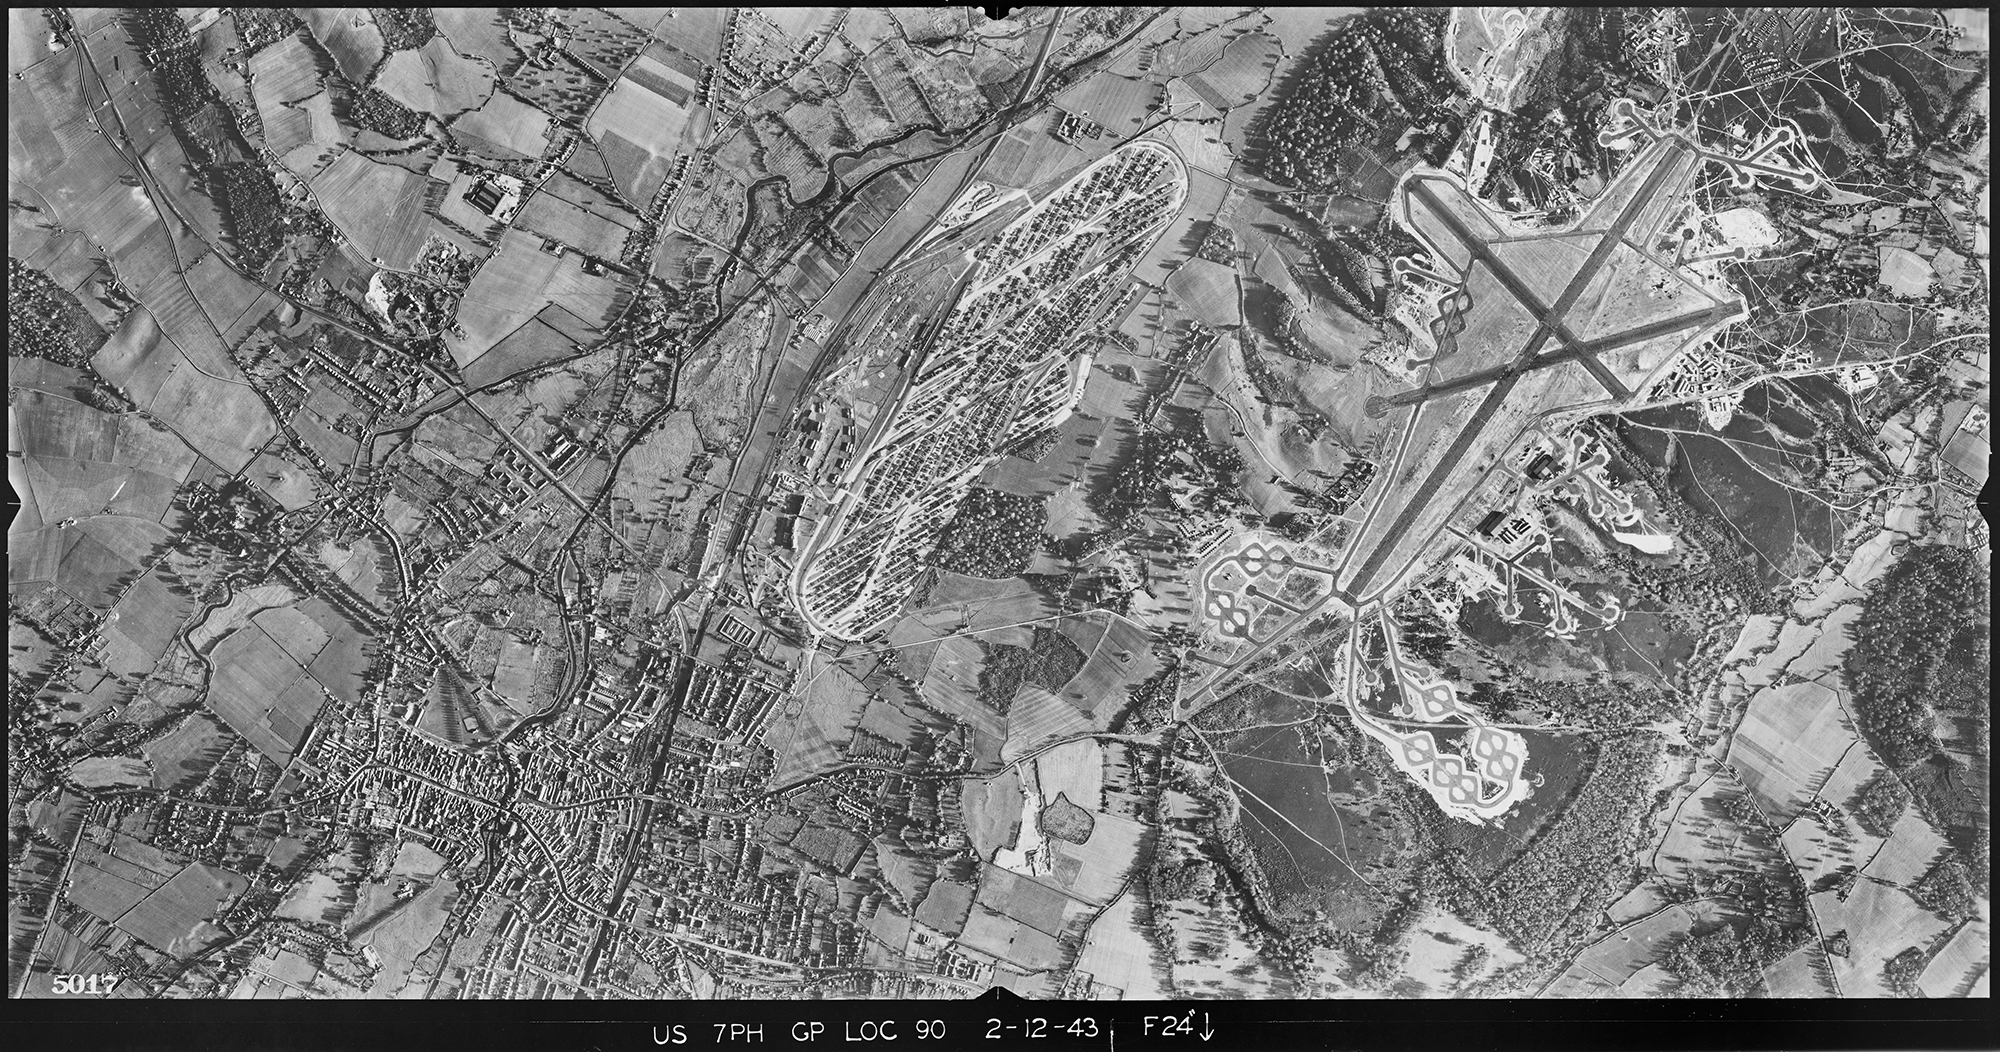 A black and white vertical aerial photograph featuring an urban area close to an airfield with three runways. Between are patches of woodland and and fields.